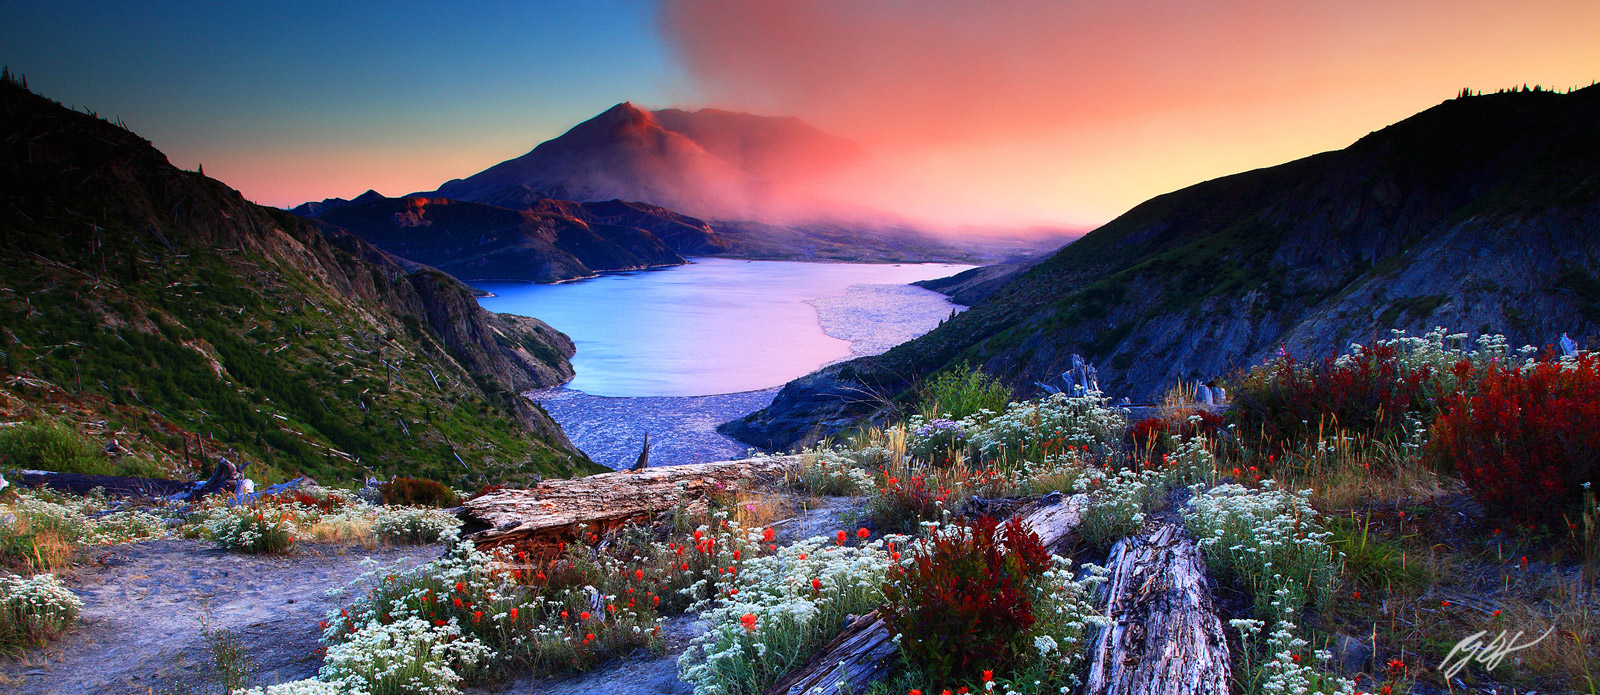 Sunset Wildflowers and Mt St Helens from Norway Pass, Mt Sty Helens National Volcanic Monument, Washington